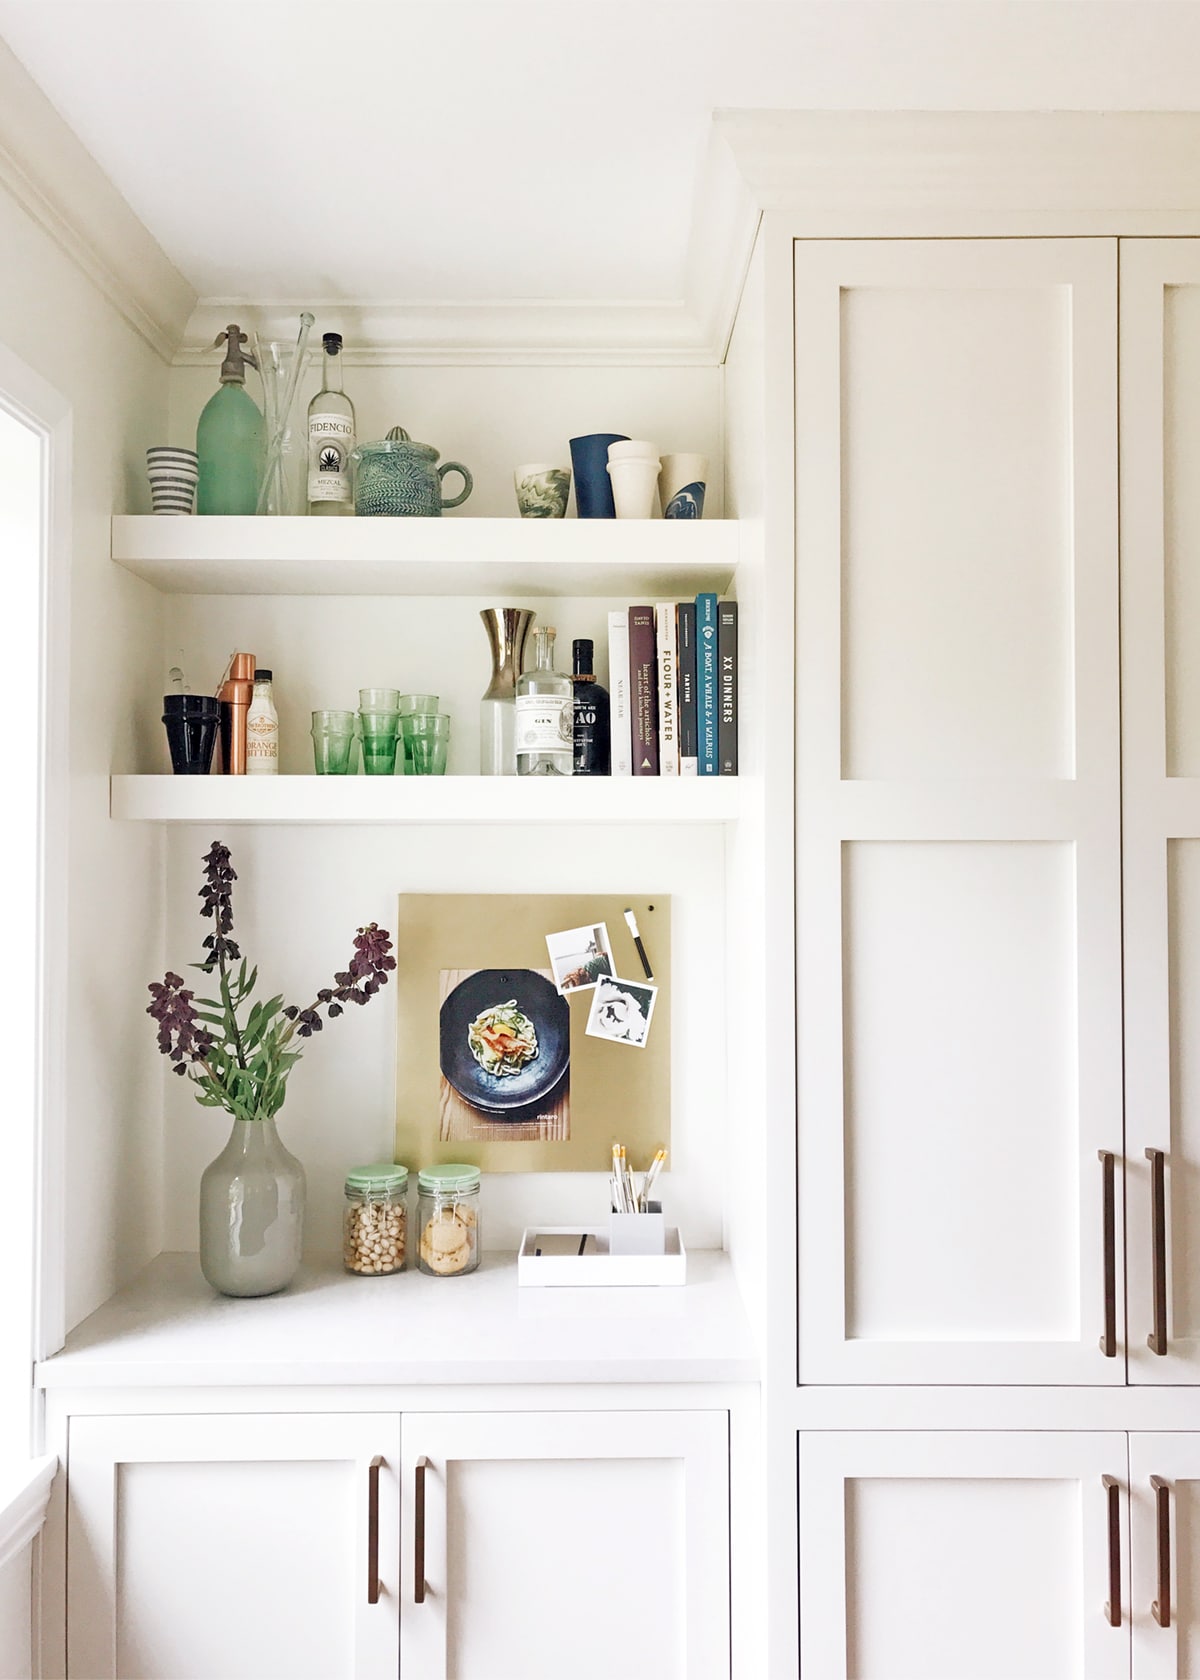 styled kitchen shelves | coco kelley